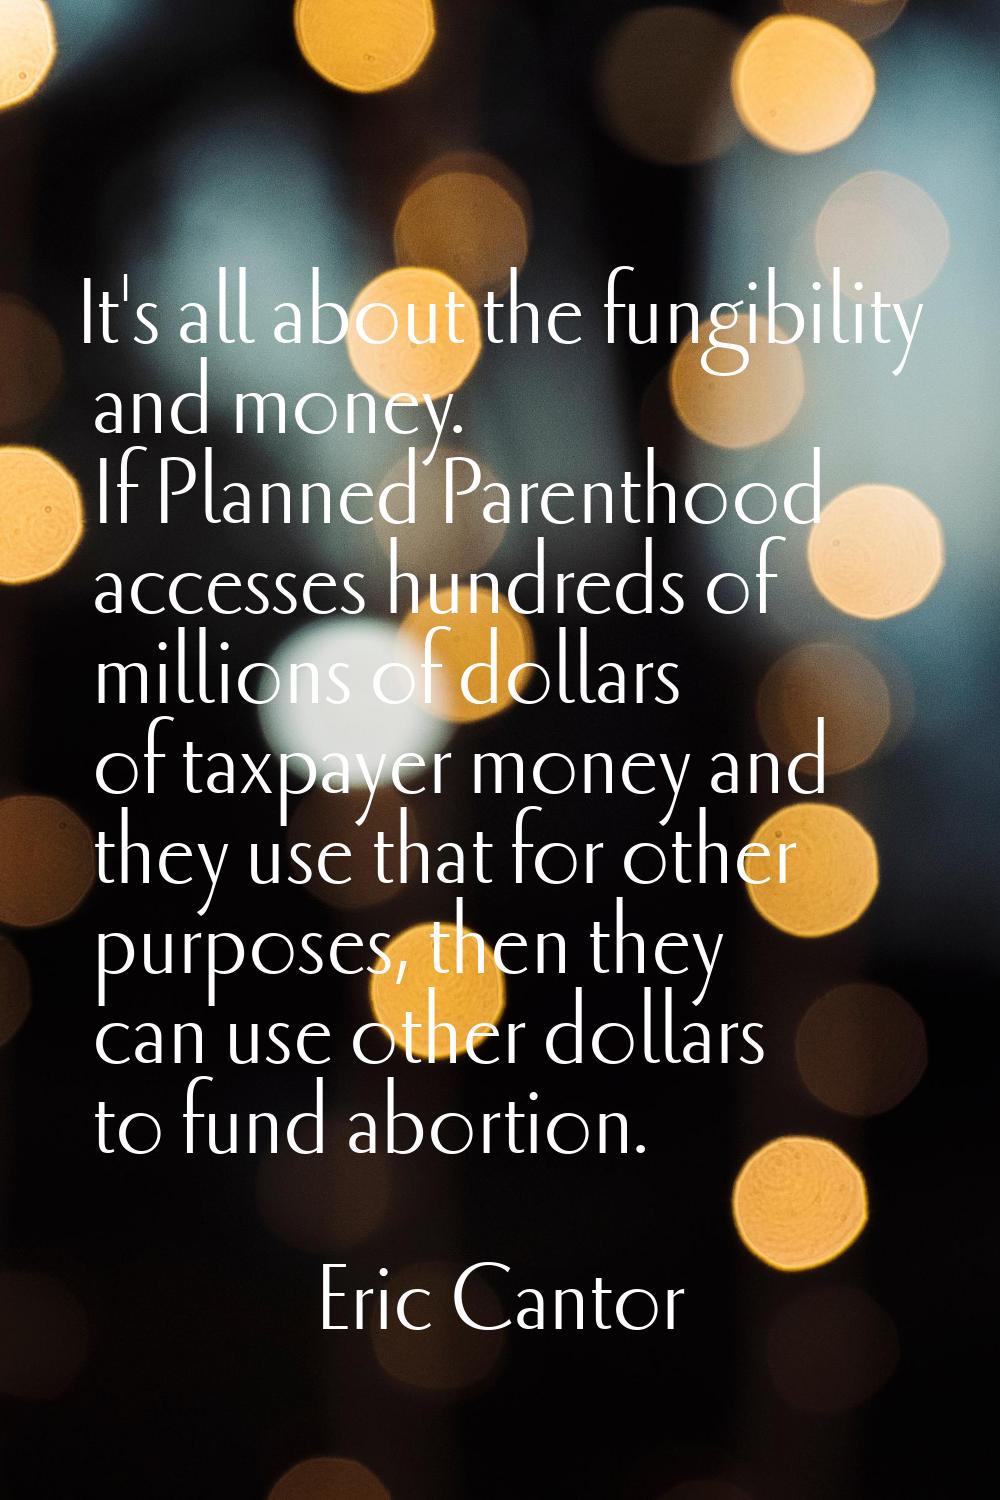 It's all about the fungibility and money. If Planned Parenthood accesses hundreds of millions of do